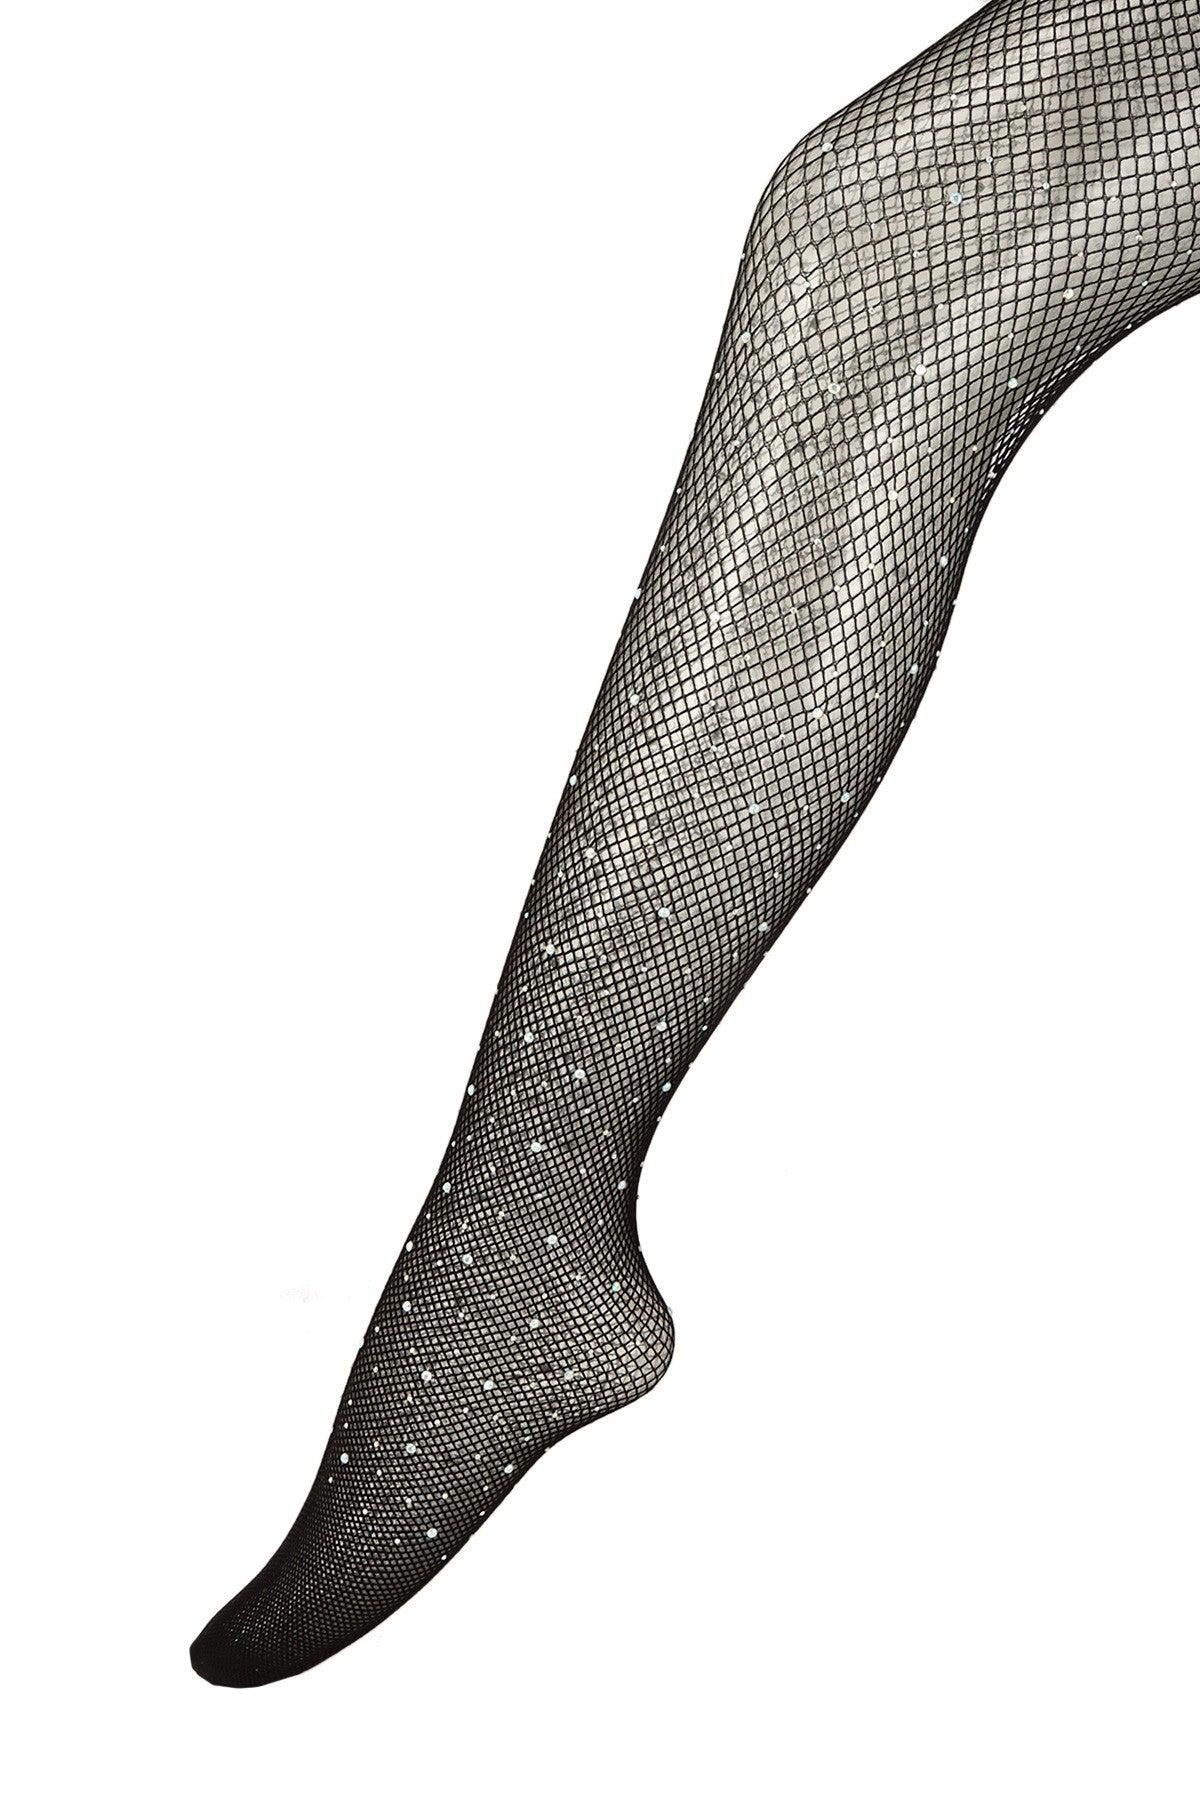 rhinestone fishnet tights – RK Collections Boutique